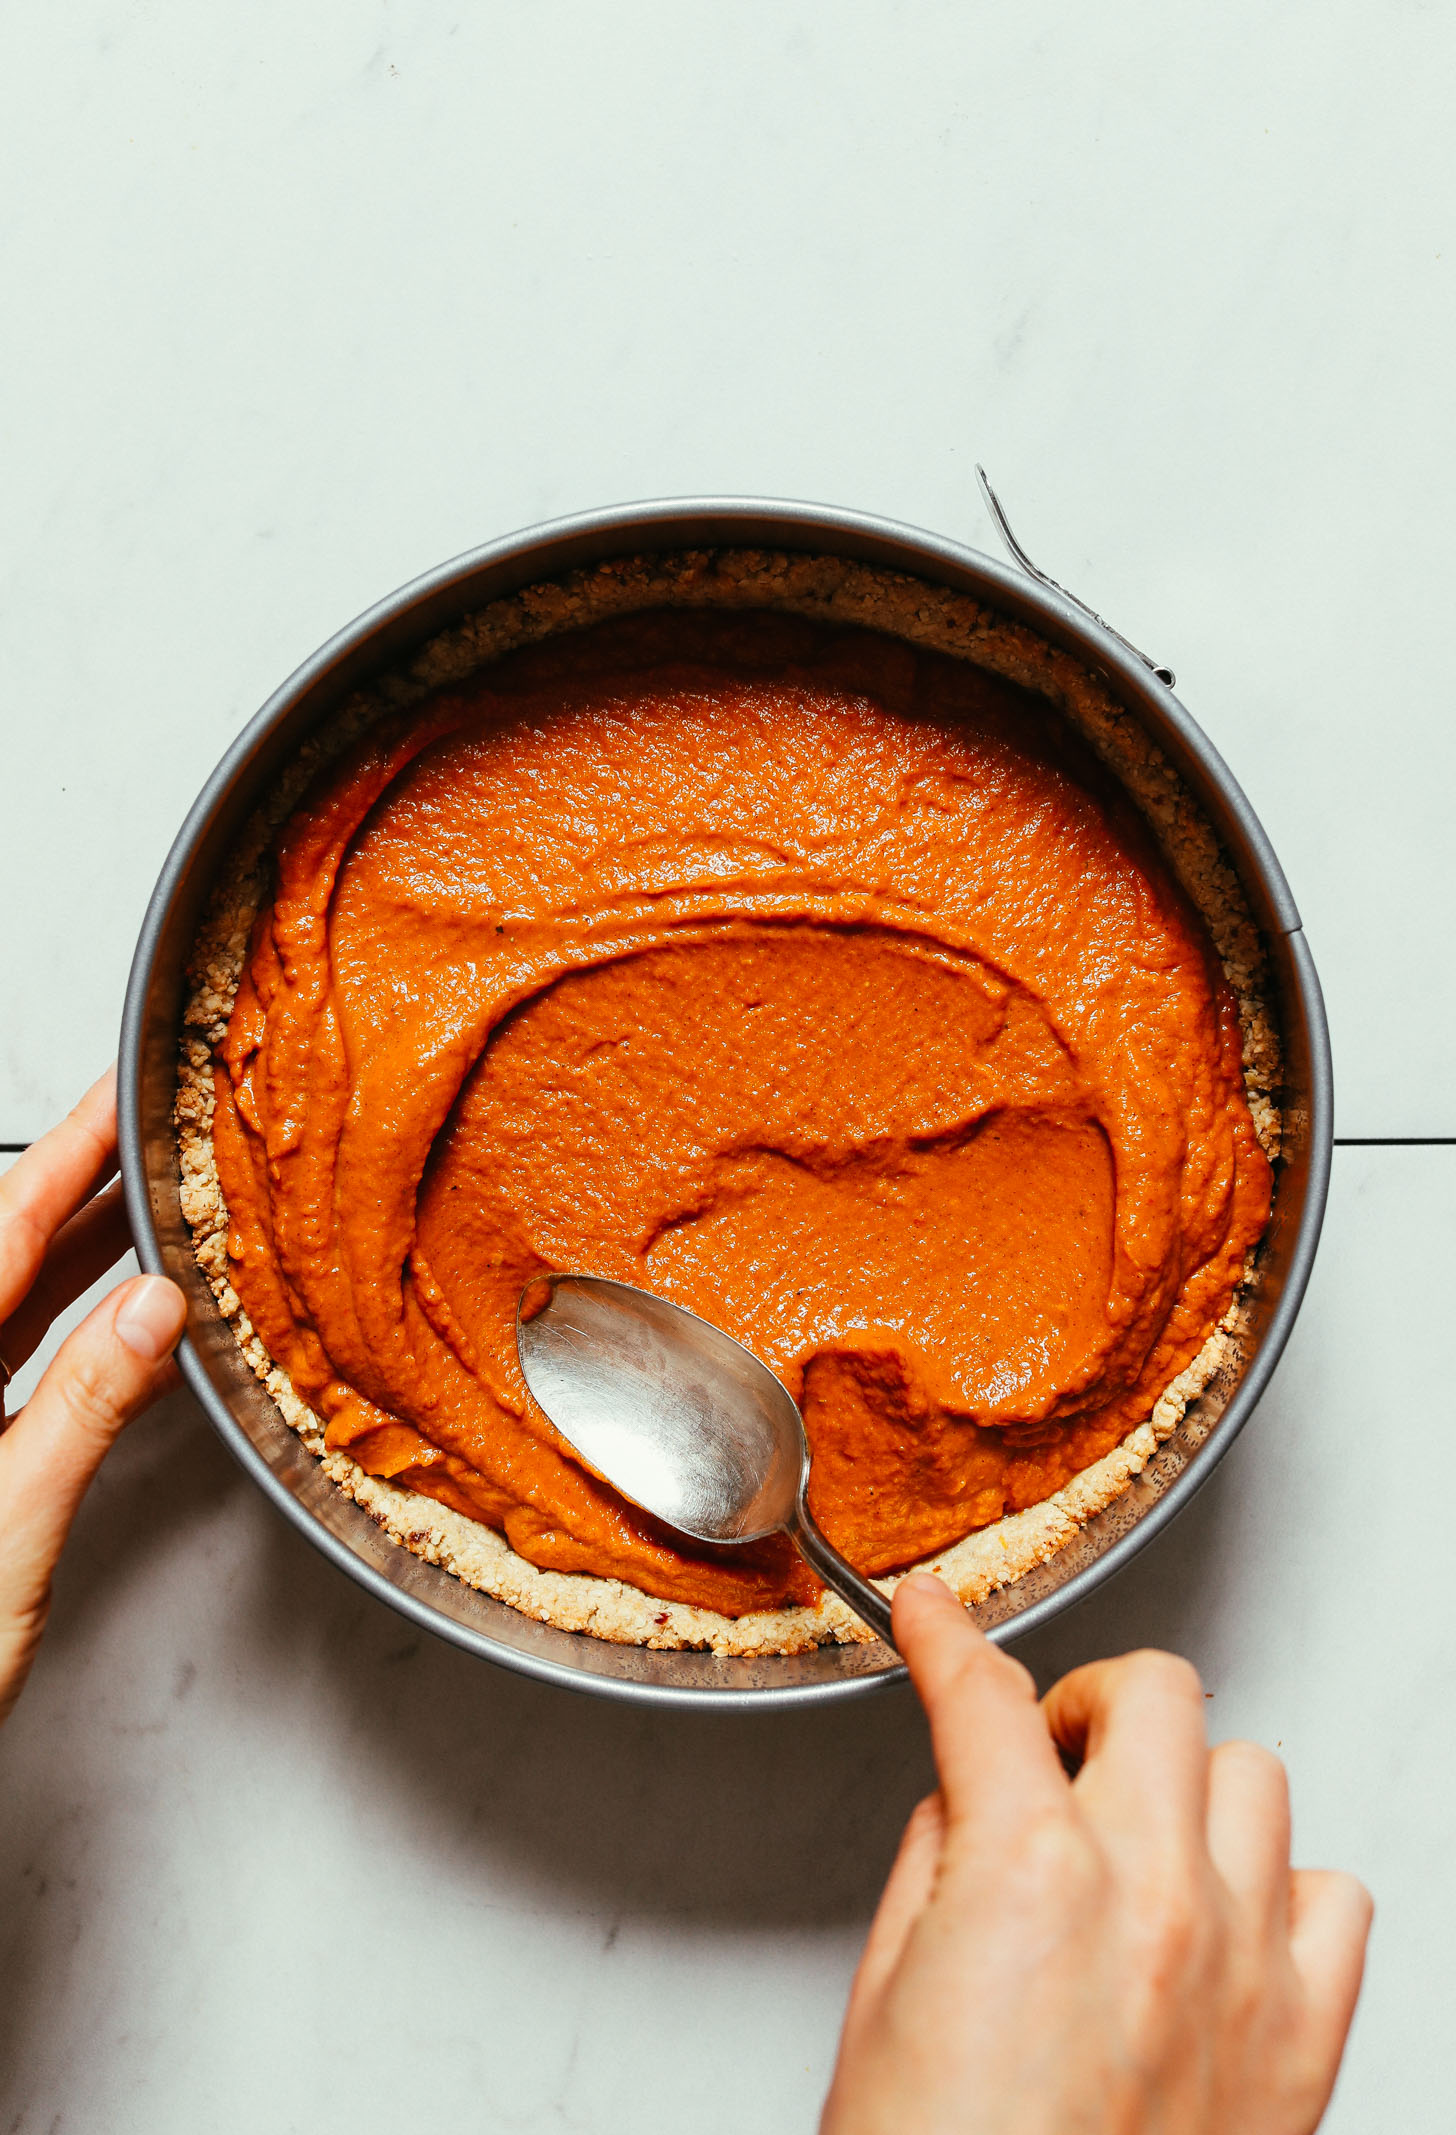 Using a spoon to spread filling into our Vegan Gluten-Free Pumpkin Pie Crust